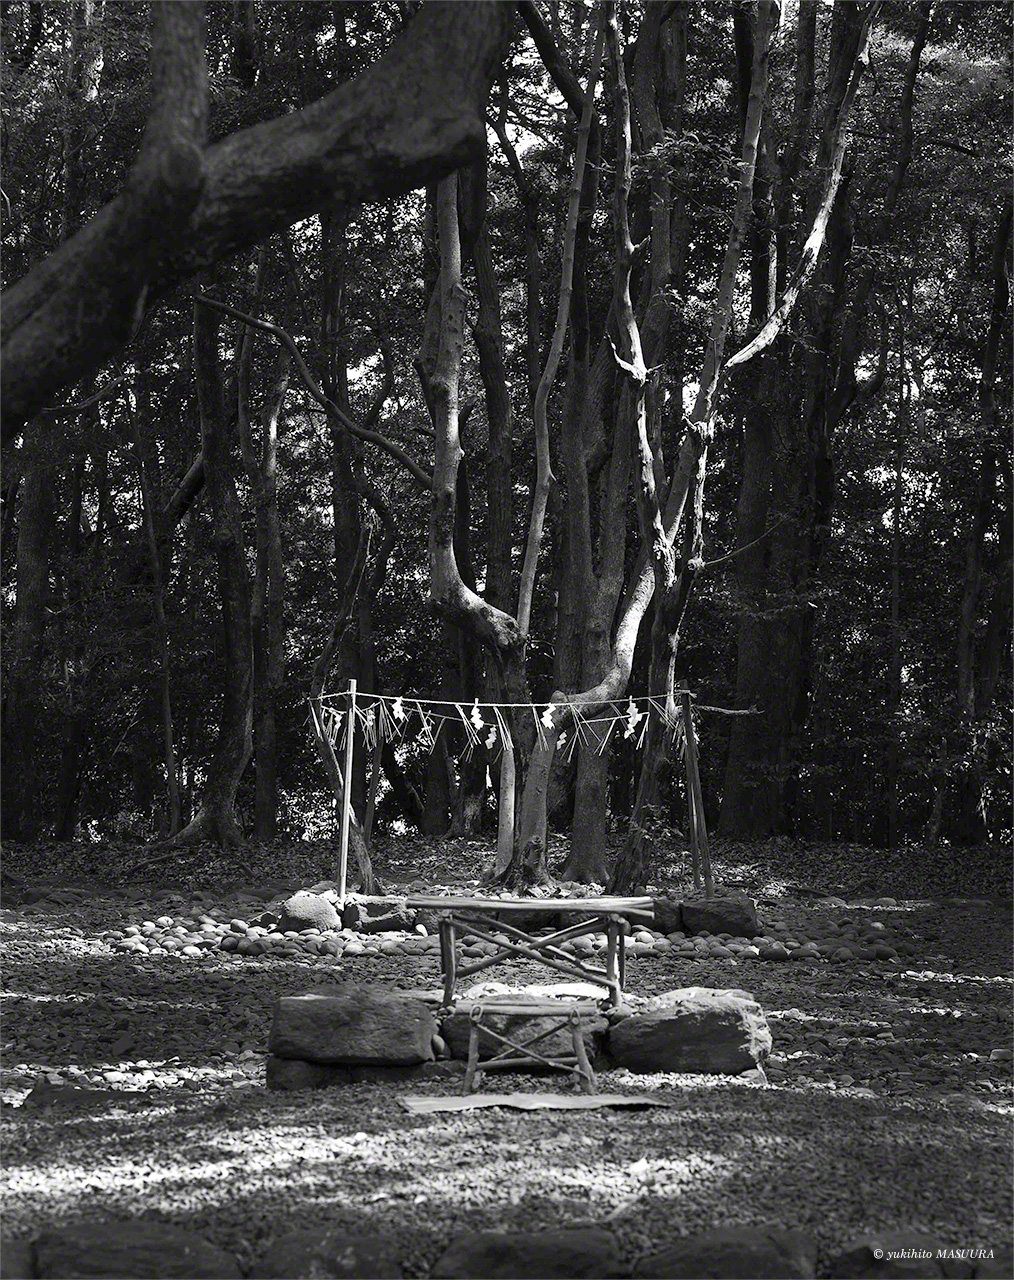 The Takamiya ceremony site, in the rear of Hetsumiya’s vast grounds. The open-air site, said to be where Ichikishimahime alighted to Earth, exemplifies Japan’s ancient form of indigenous worship. (© Masuura Yukihito)